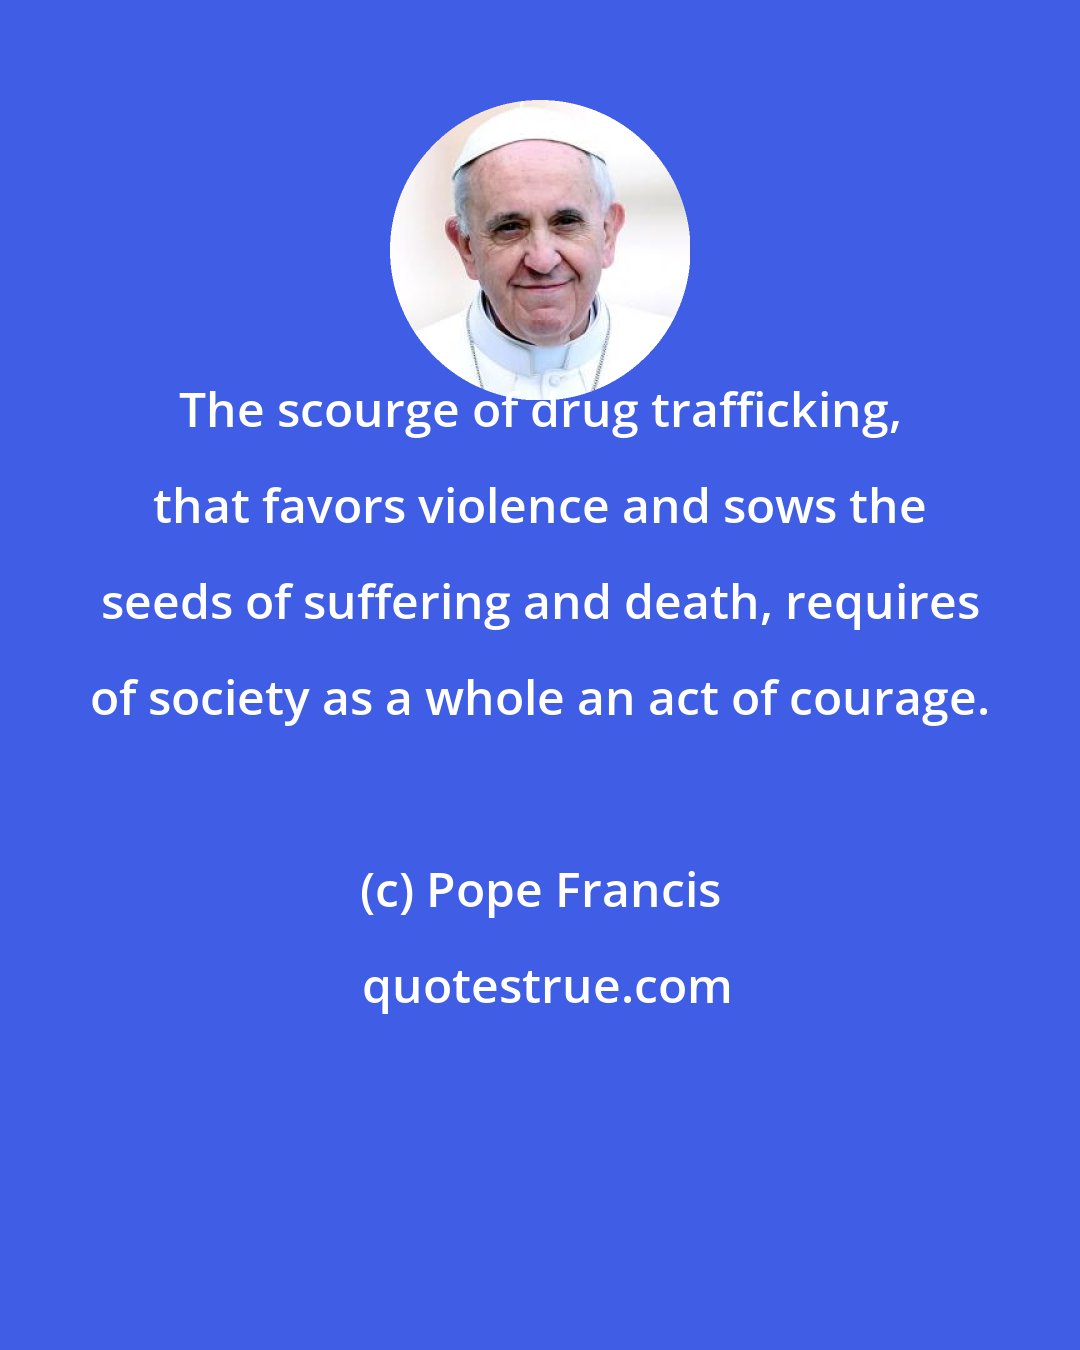 Pope Francis: The scourge of drug trafficking, that favors violence and sows the seeds of suffering and death, requires of society as a whole an act of courage.